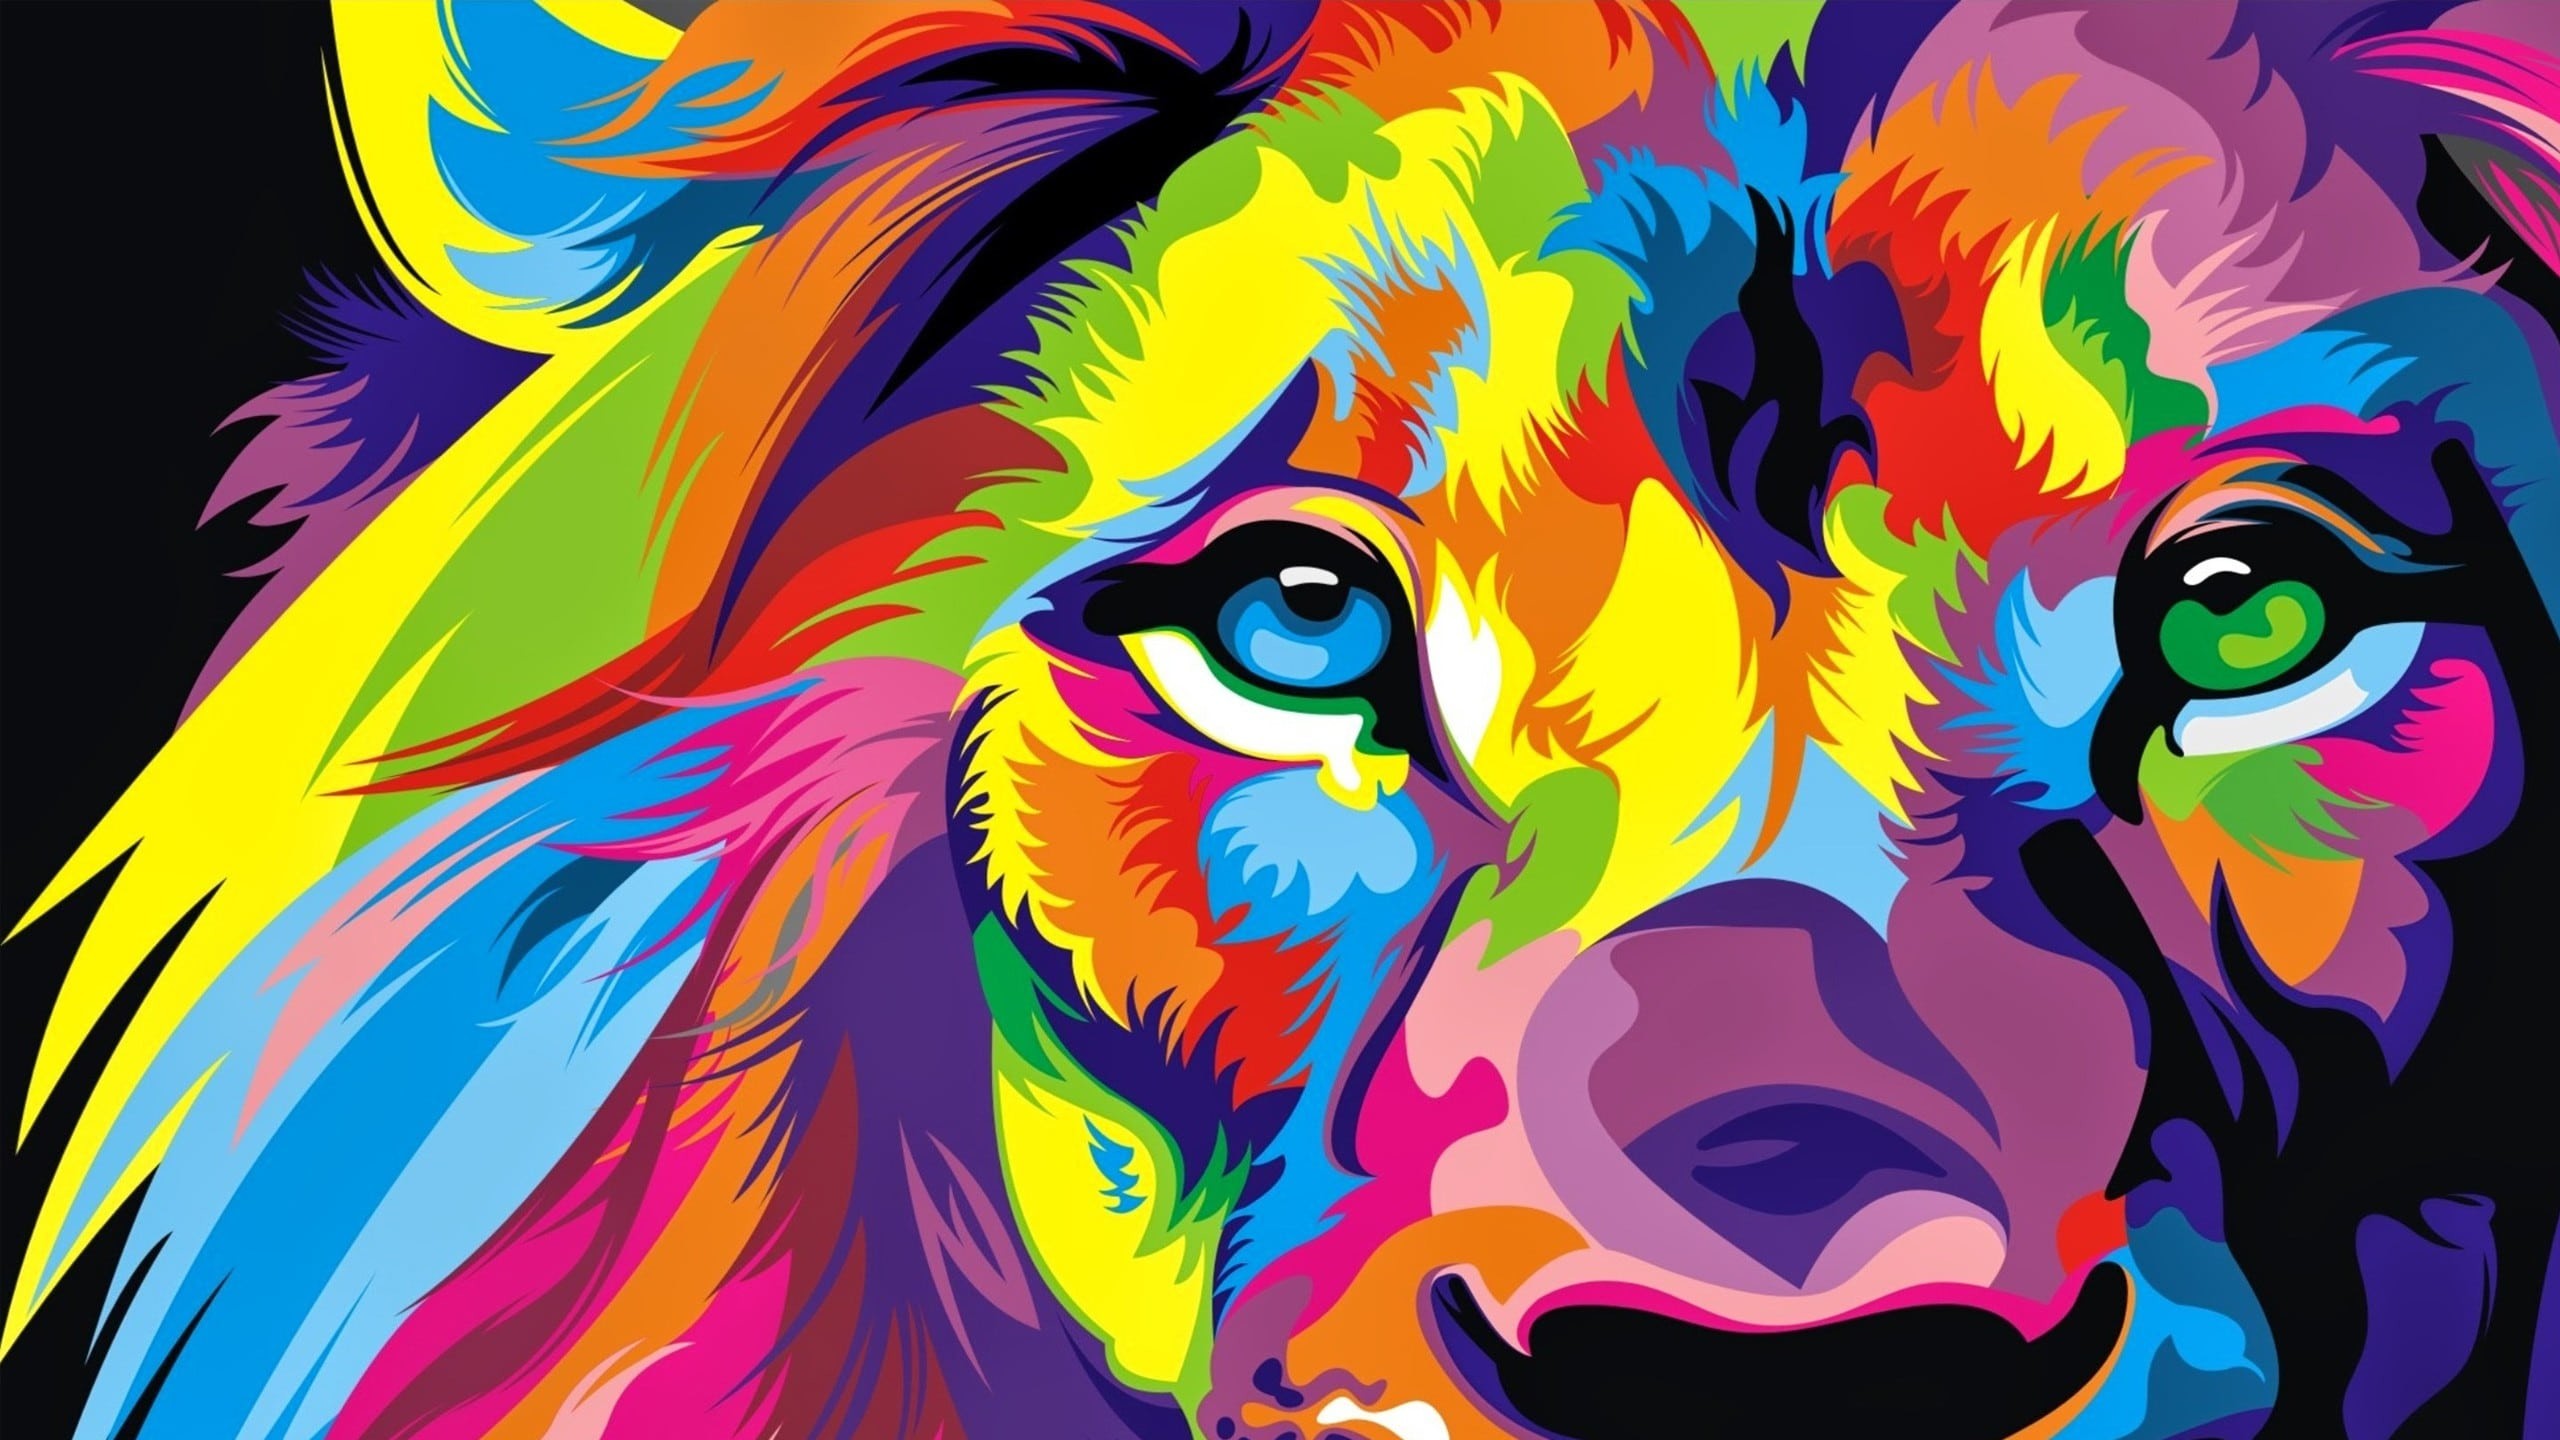 2560x1440 Lion Colorful Rainbow Artwork #1372 Wallpapers and Free Stock Photos |  Visual Cocaine